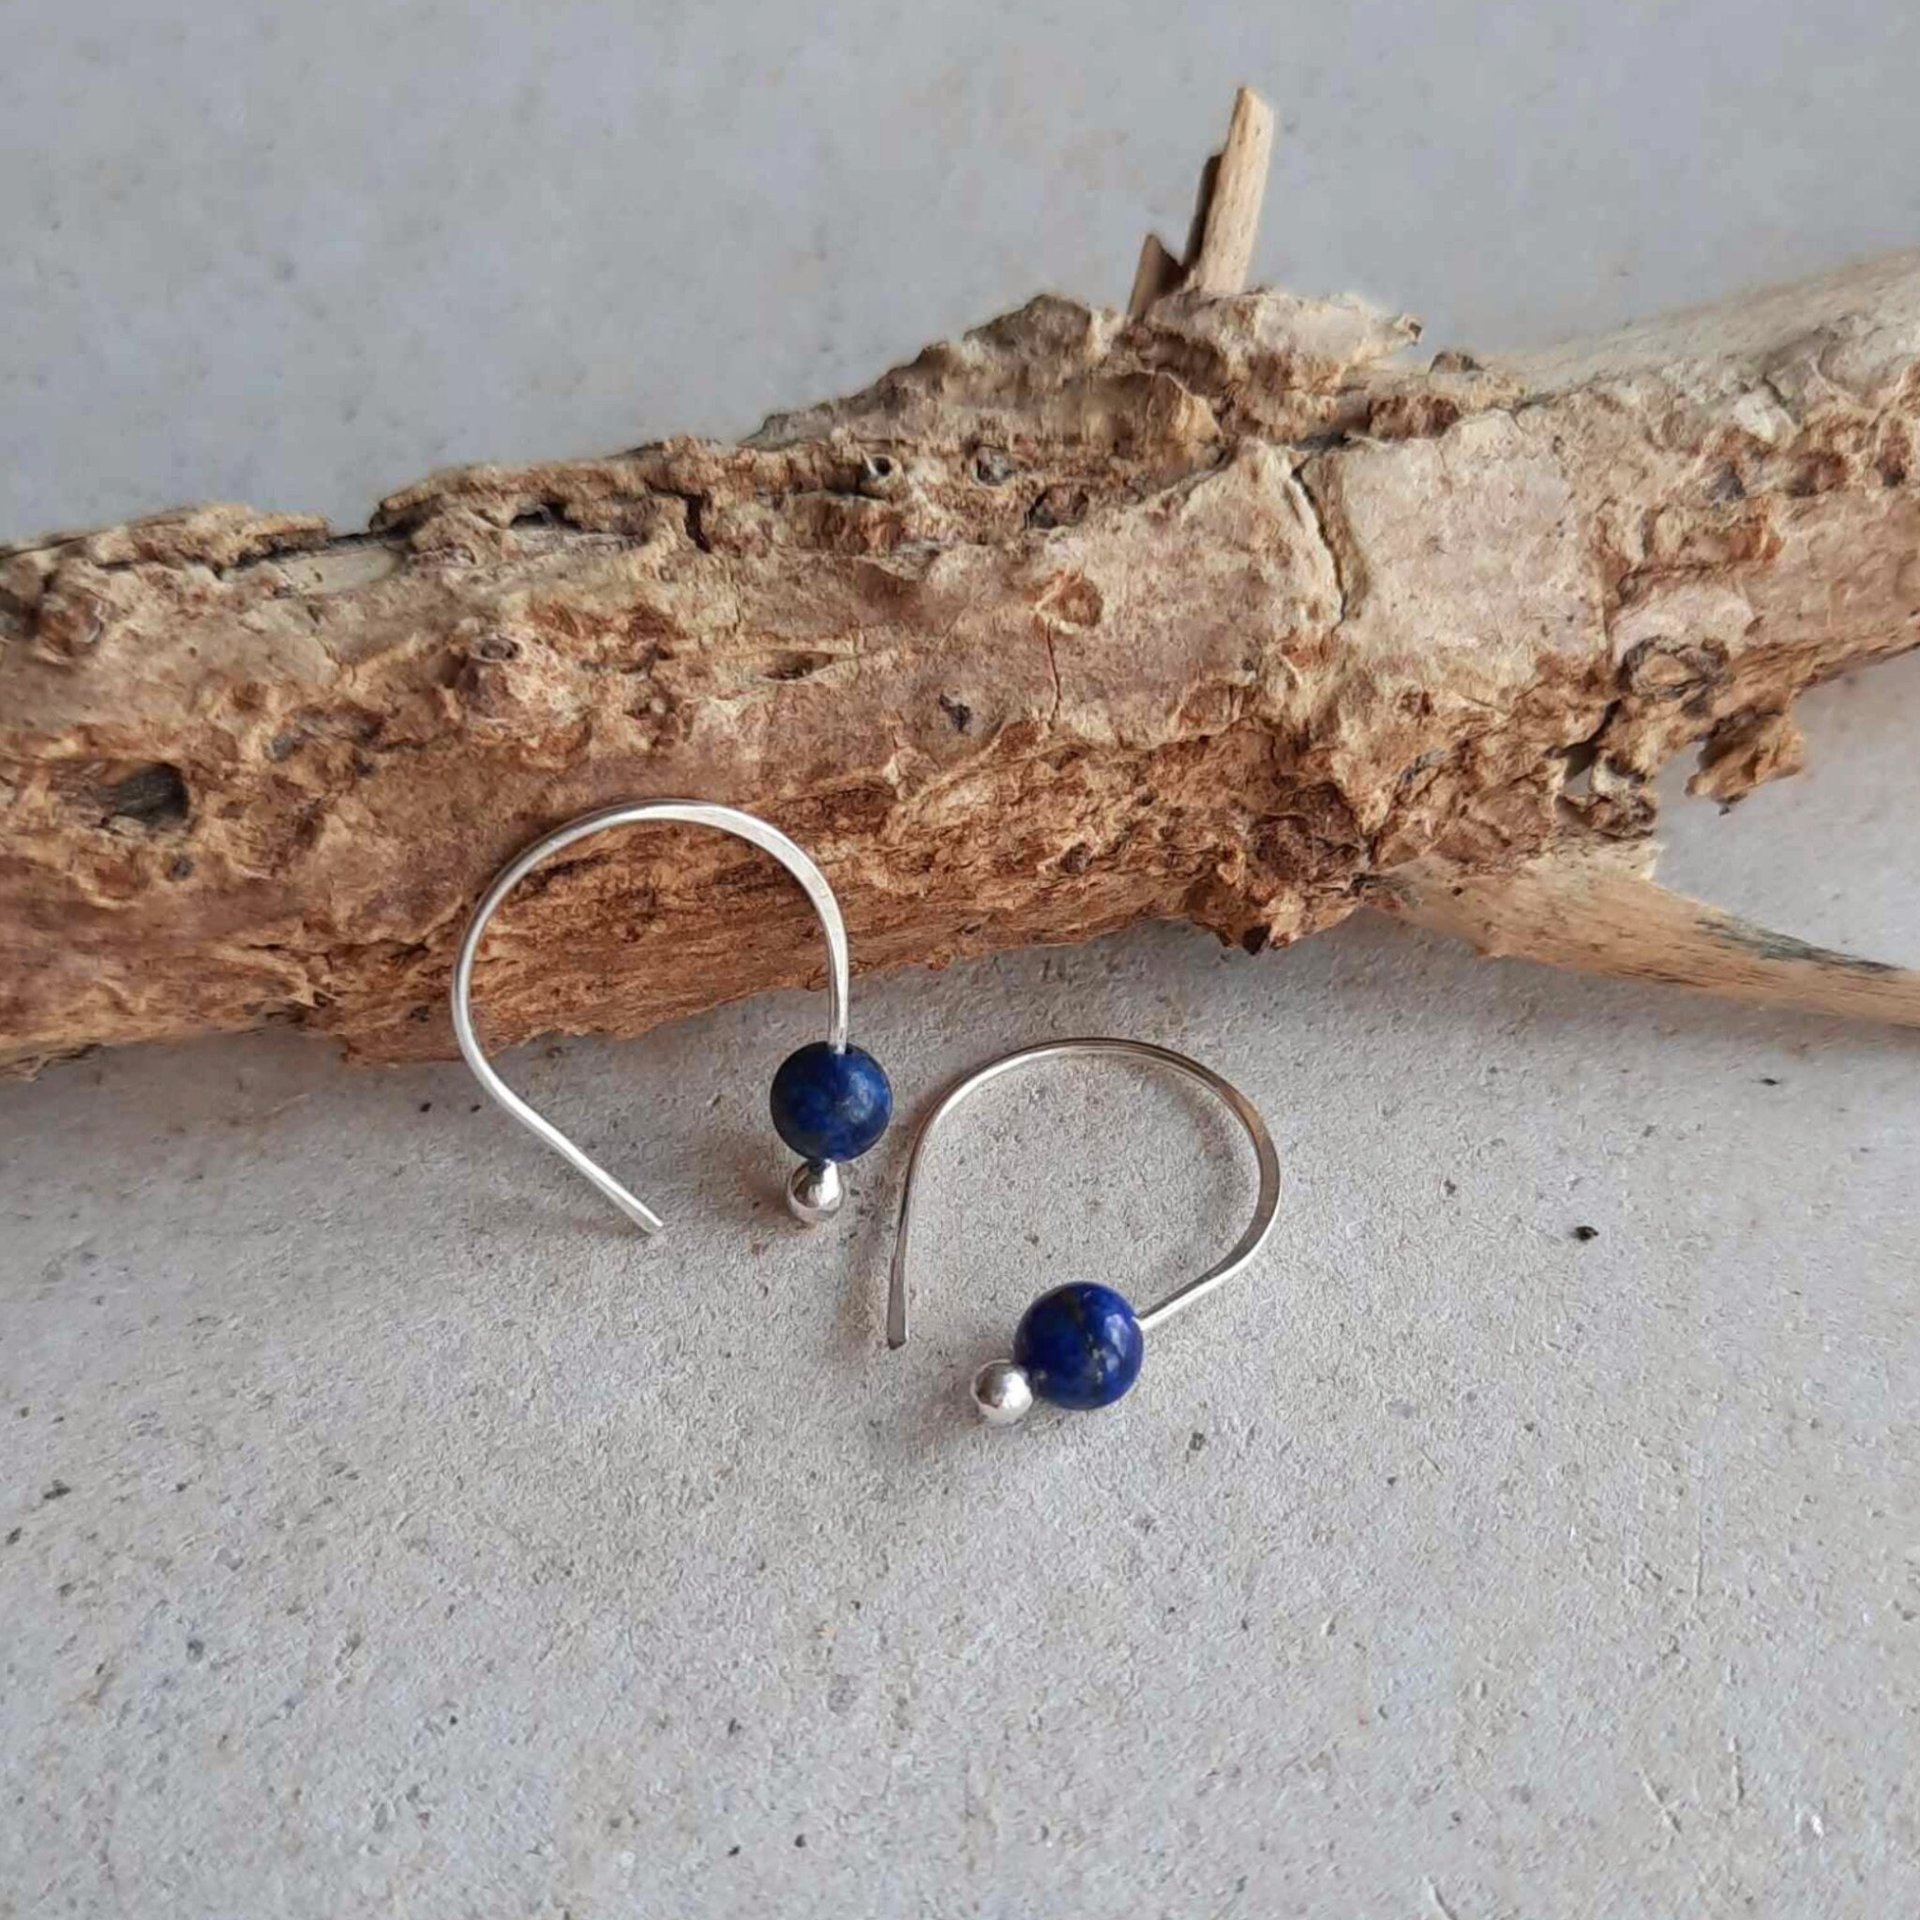 Recycled sterling silver and lapis lazuli gemstone half hoop earrings, handcrafted by The Tiny Tree Frog Jewellery